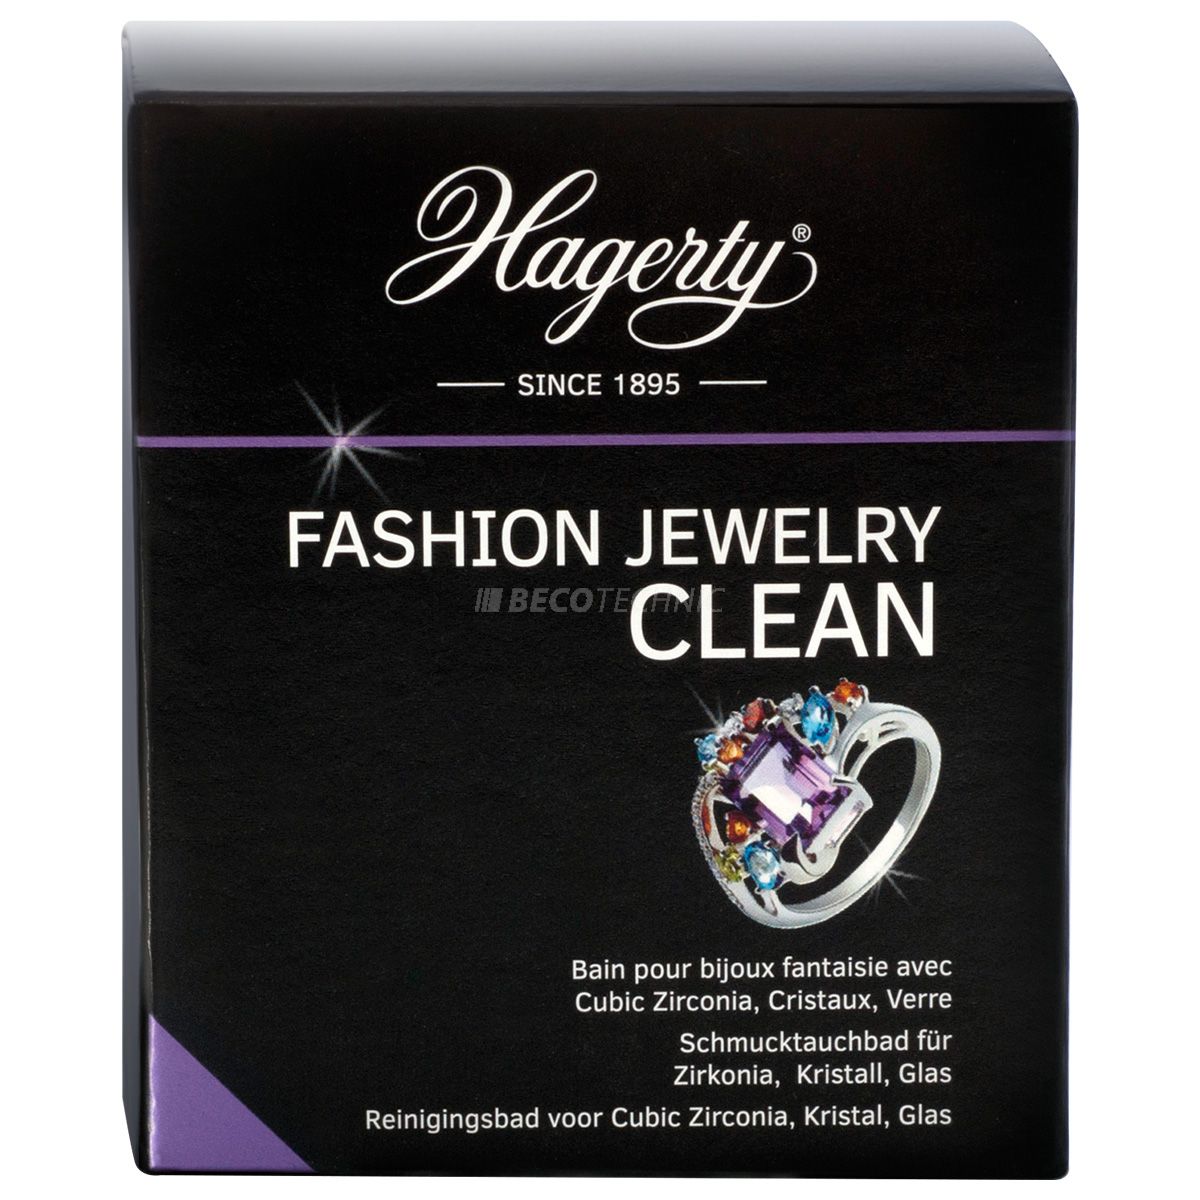 Hagerty Fashion Jewelry Clean,dipping bath for jewels, 170 ml